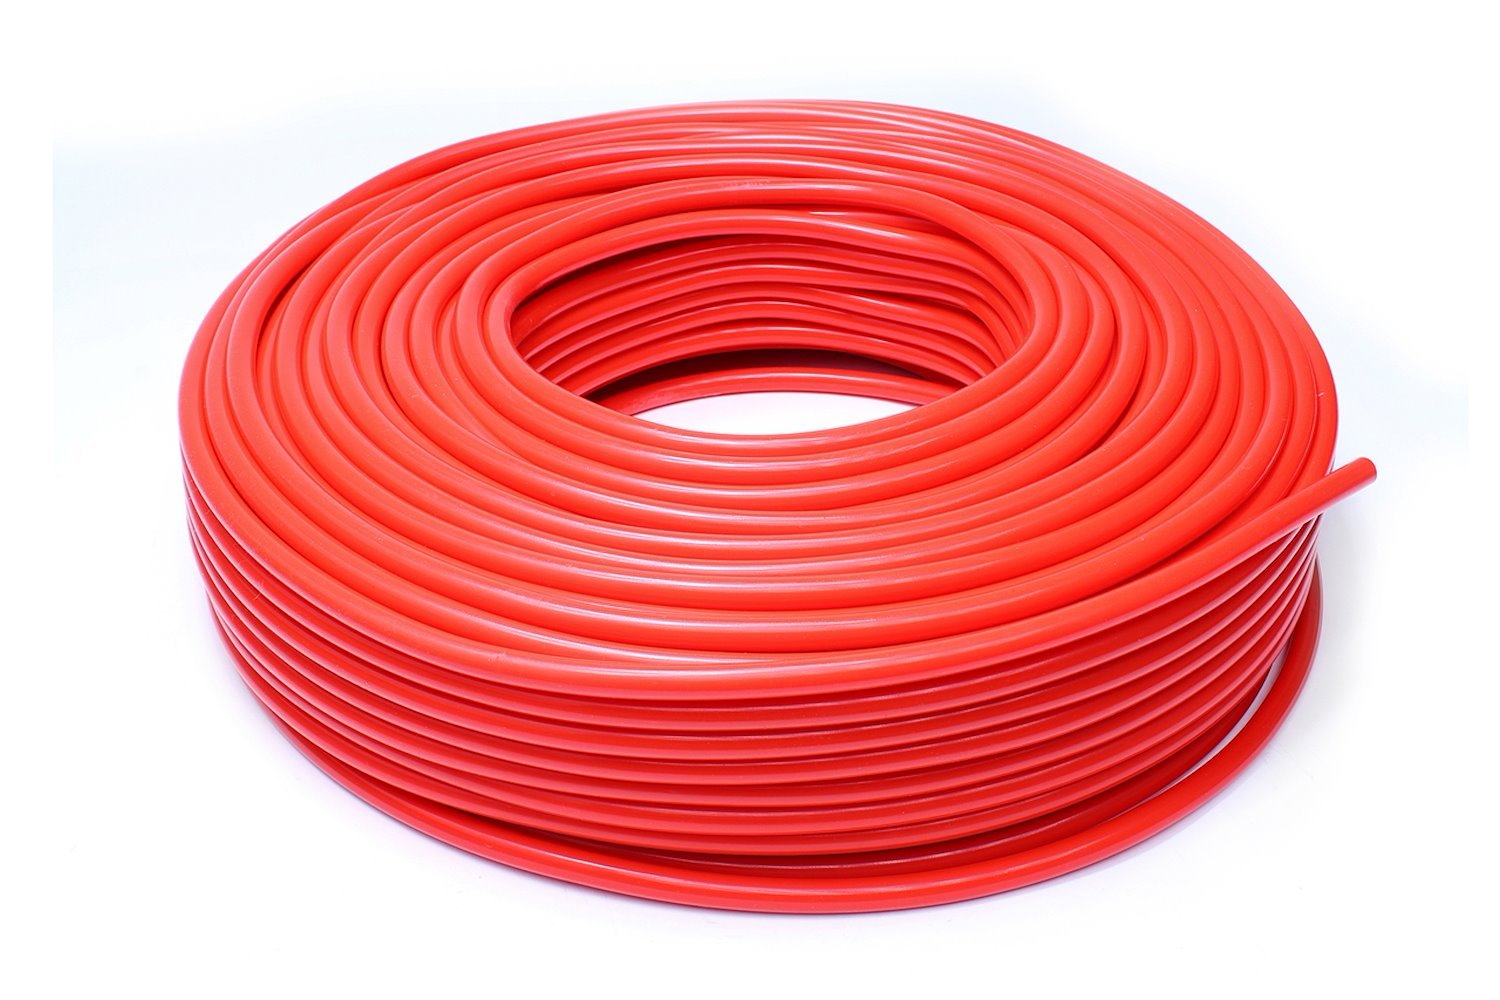 HTSVH8-REDx100 High-Temperature Silicone Vacuum Hose Tubing, 5/16 in. ID, 100 ft. Roll, Red